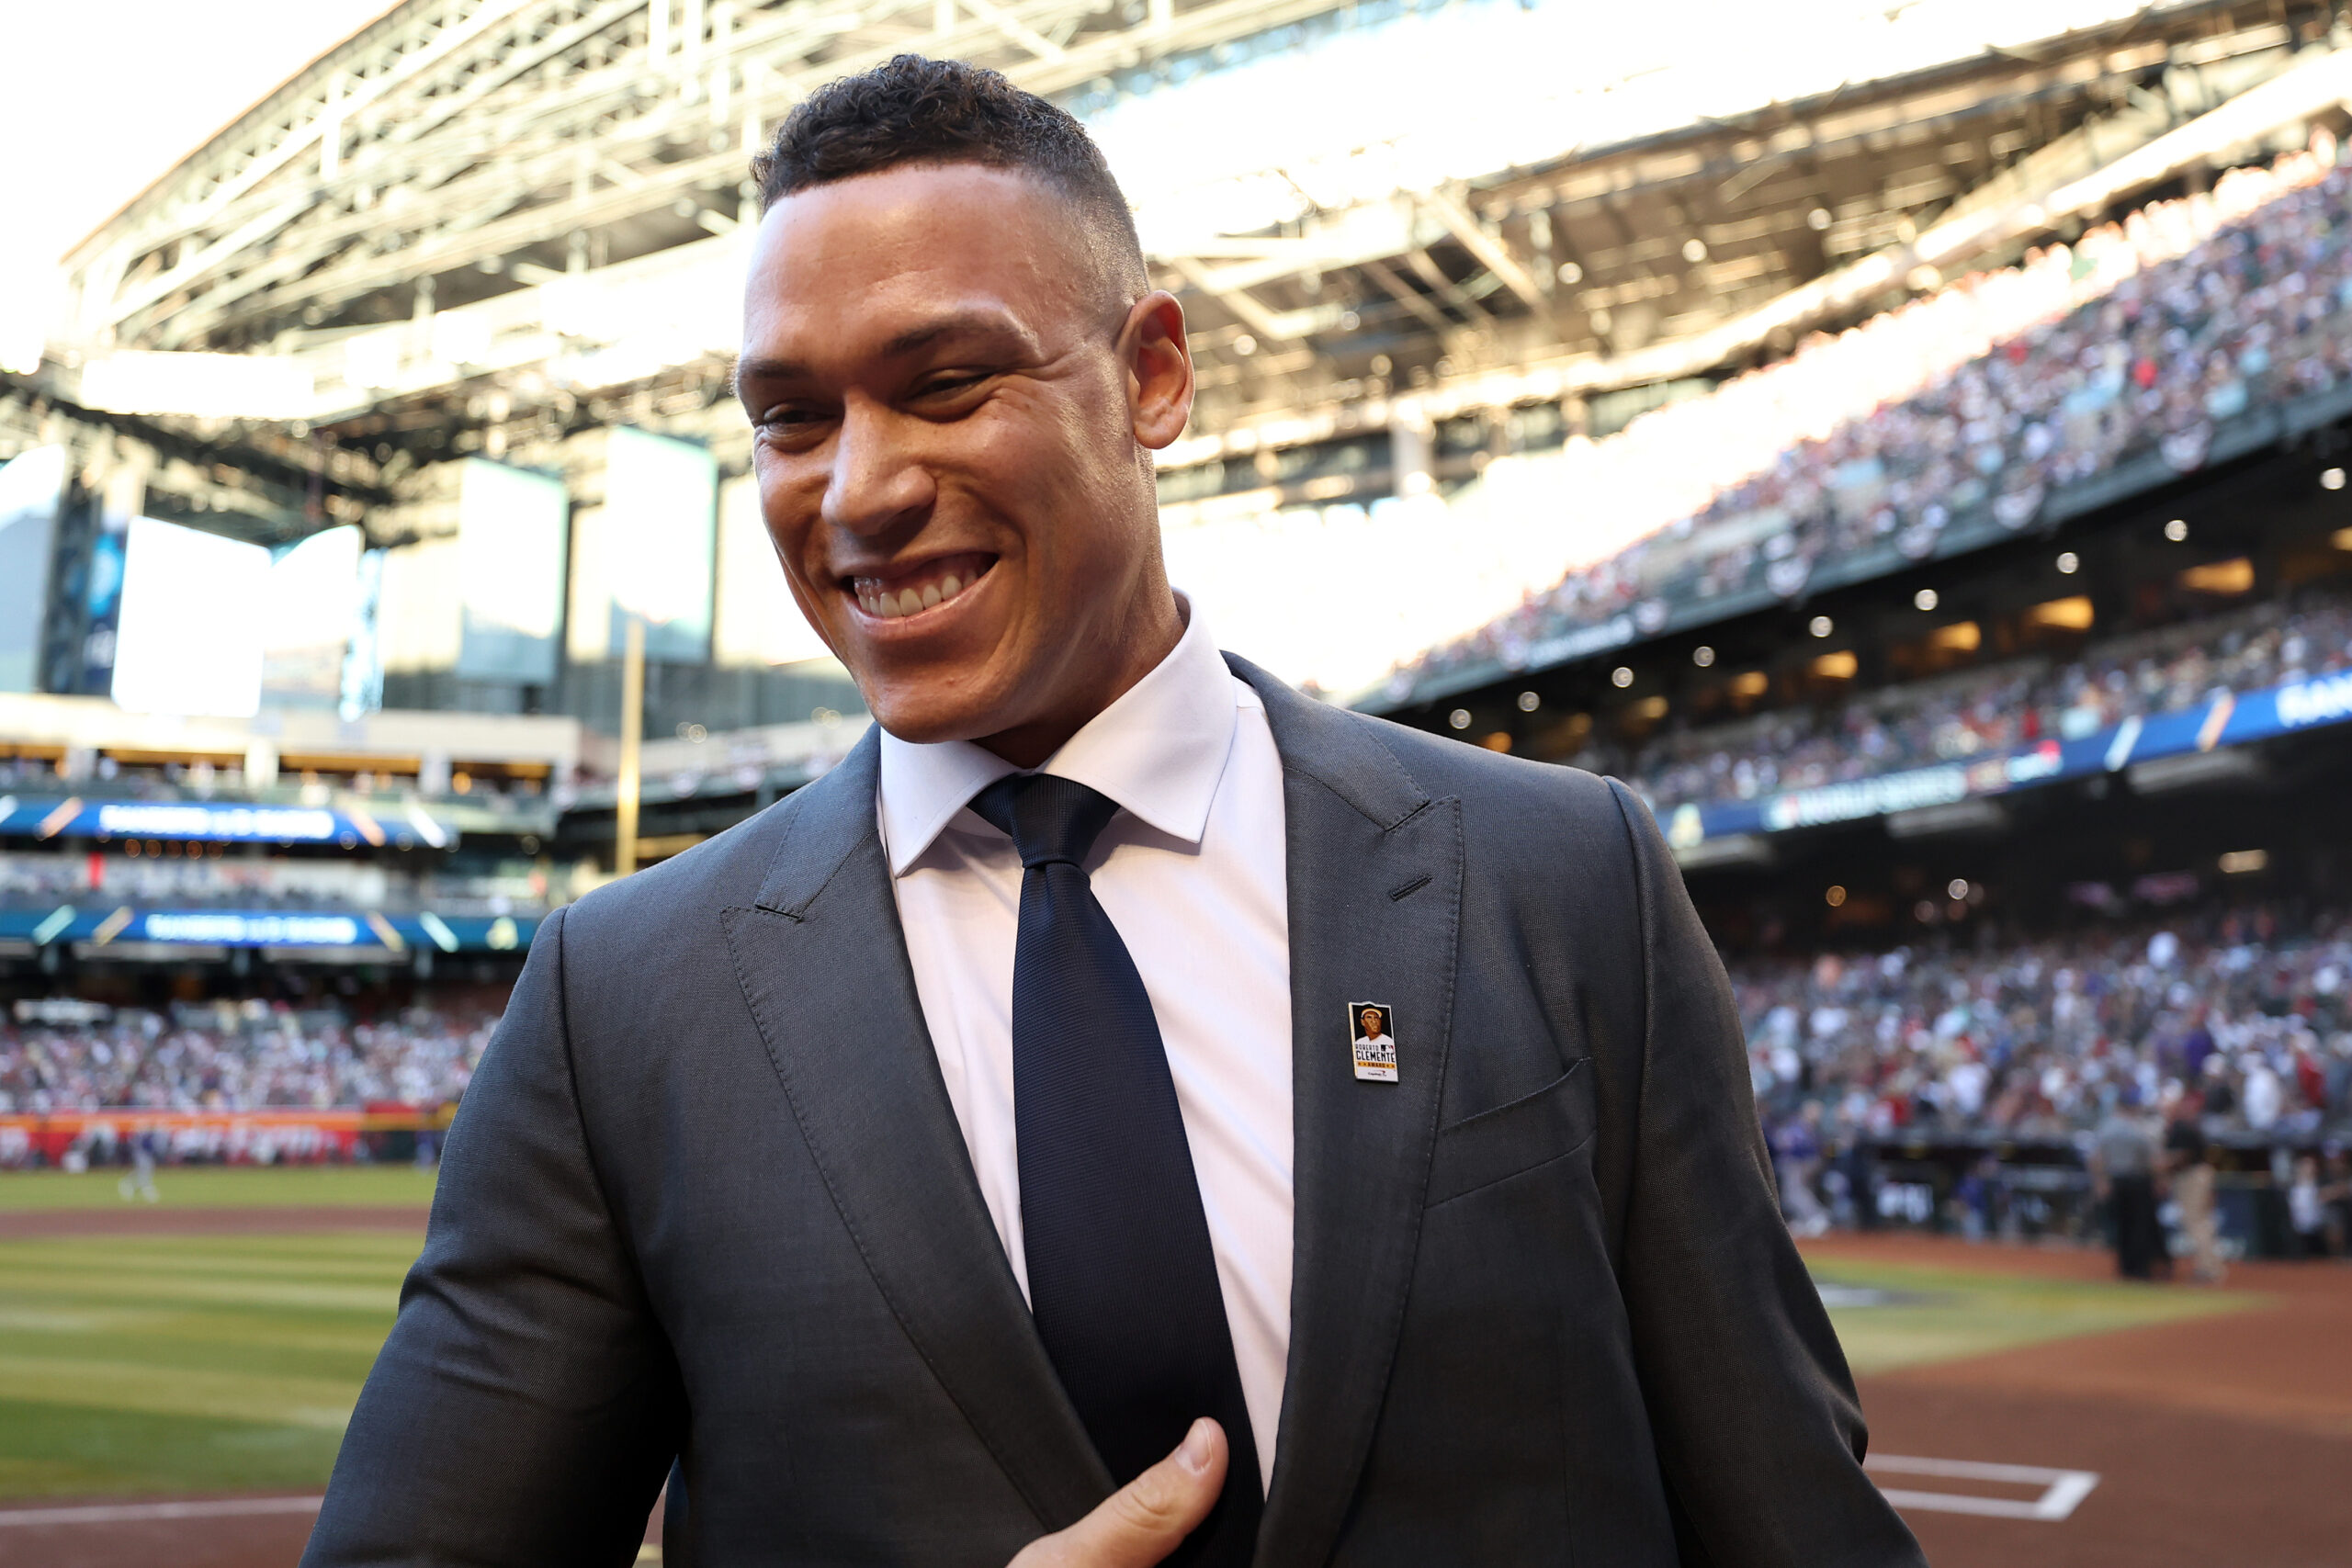 aaron-judge-thought-they-wanted-to-trade-him-when-he-received-the-call-about-the-roberto-clemente-award